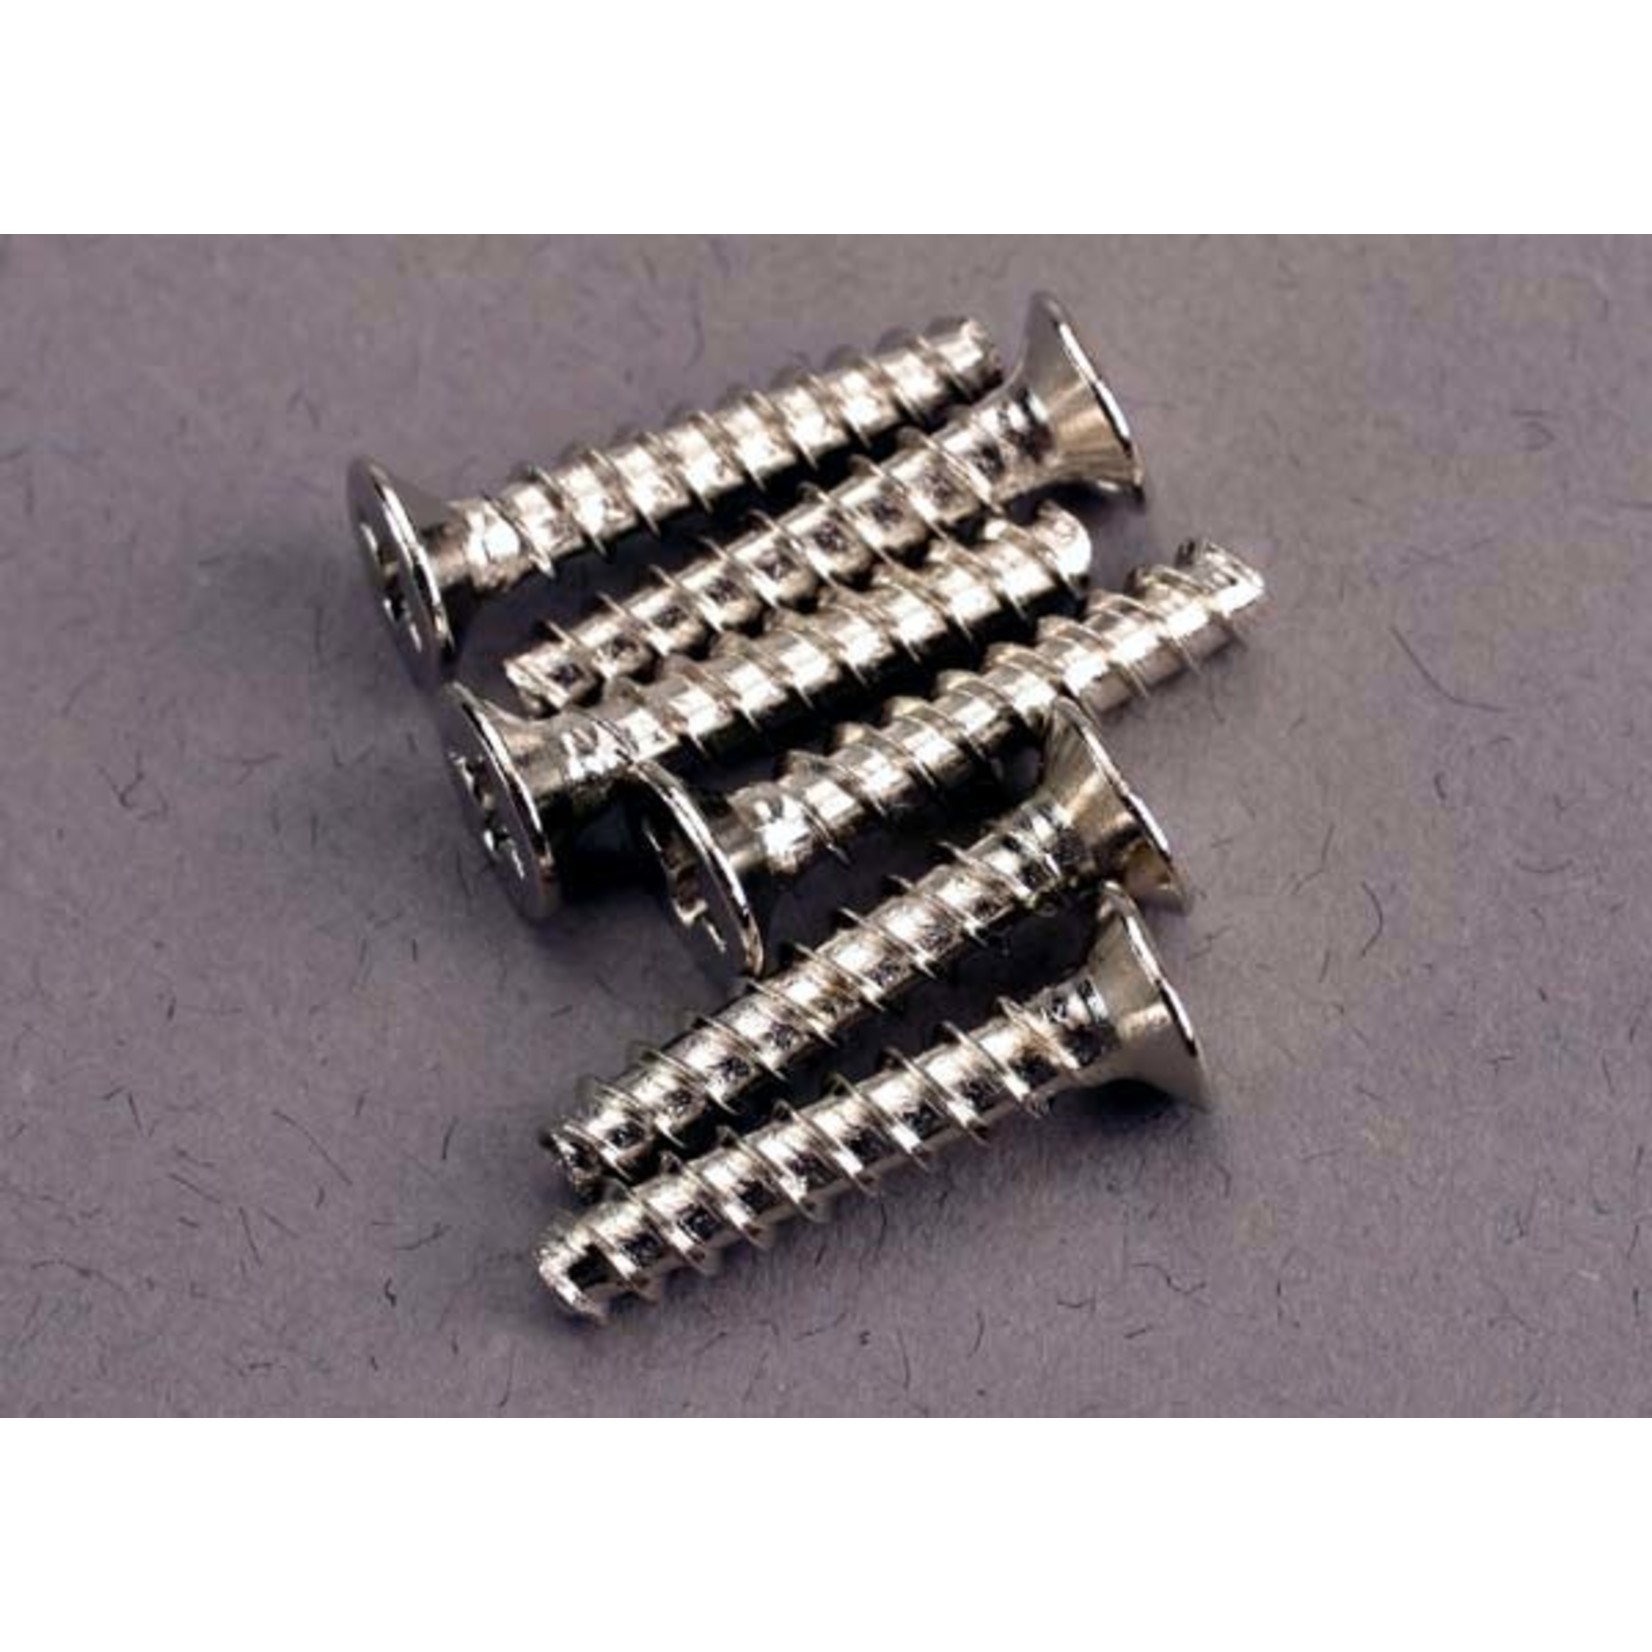 Traxxas 2649 - Screws, 3x15mm countersunk self-tapping (6)